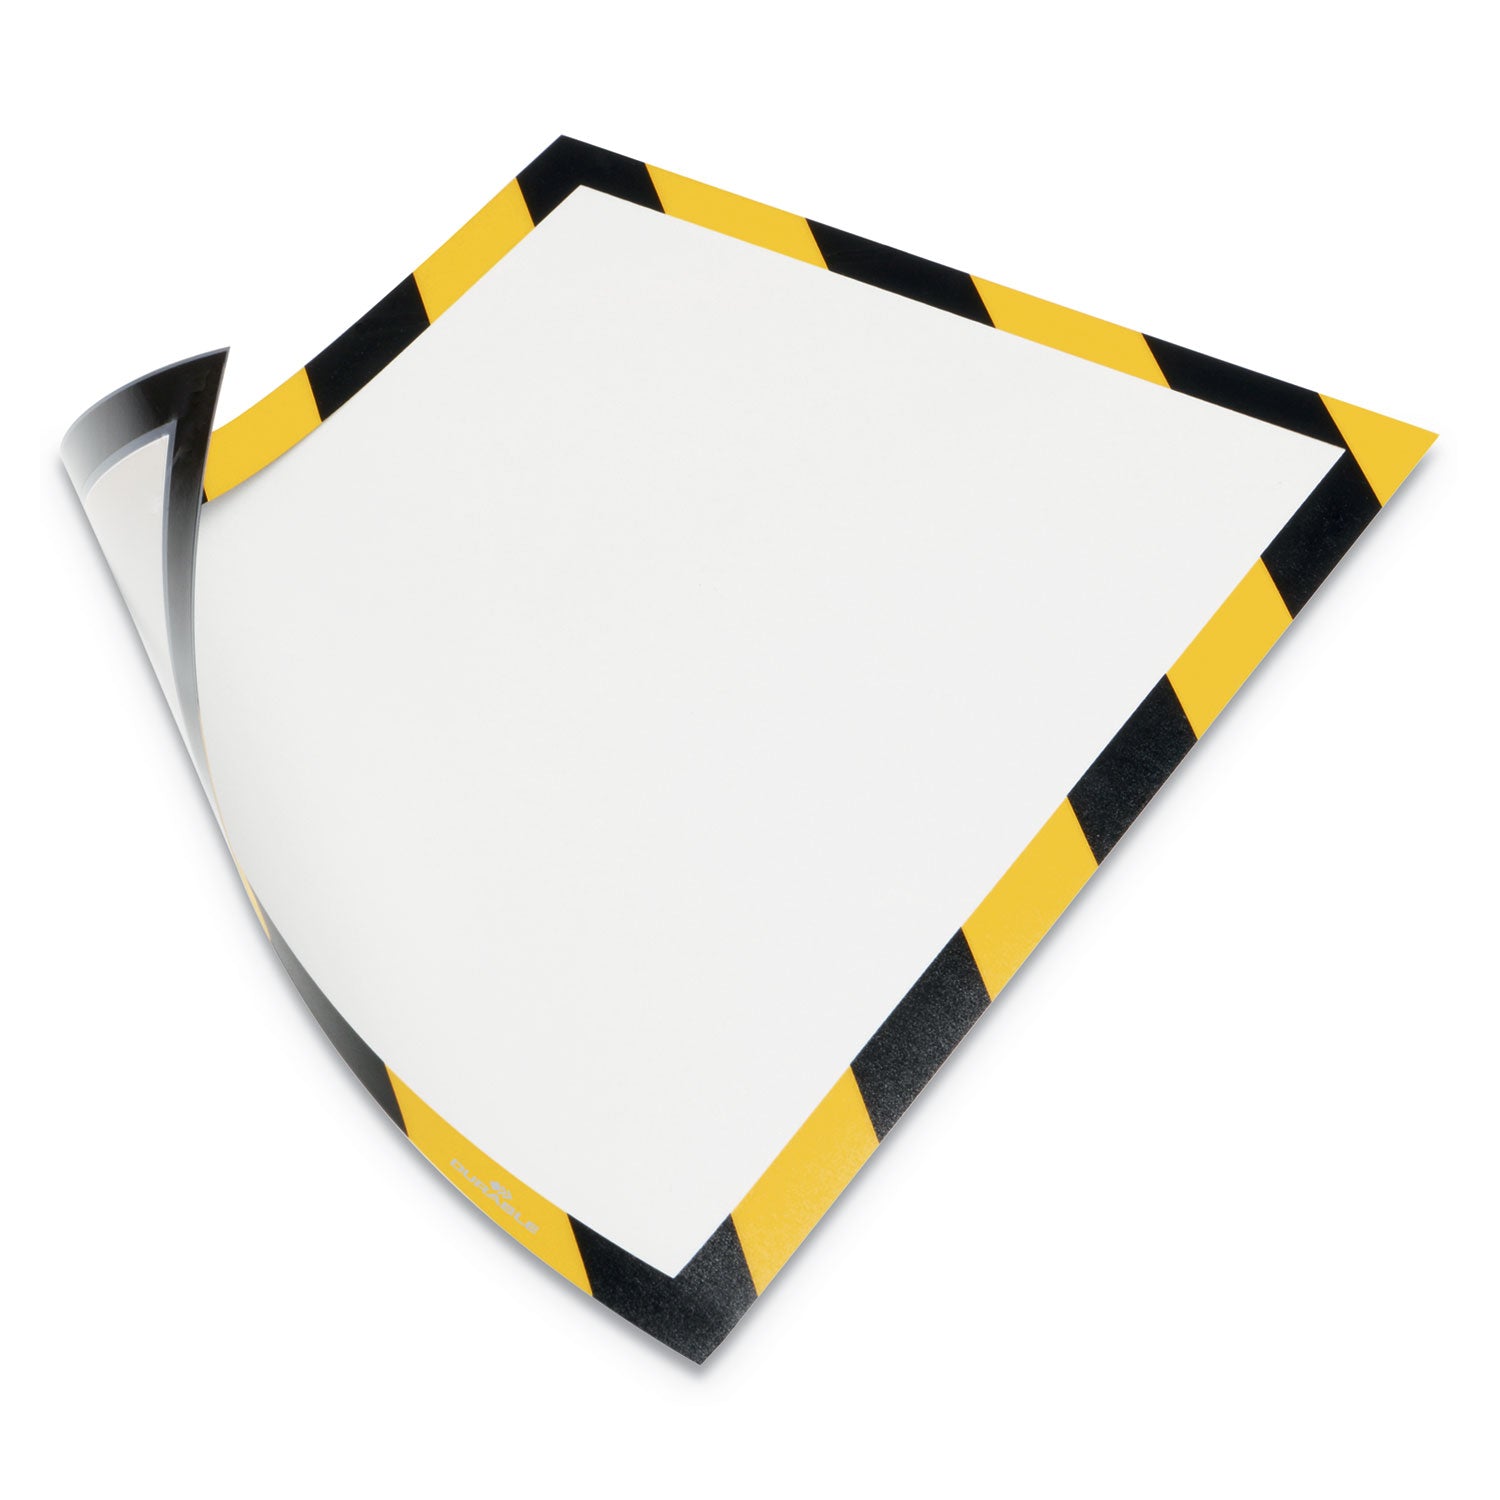 duraframe-security-magnetic-sign-holder-85-x-11-yellow-black-frame-2-pack_dbl4772130 - 1